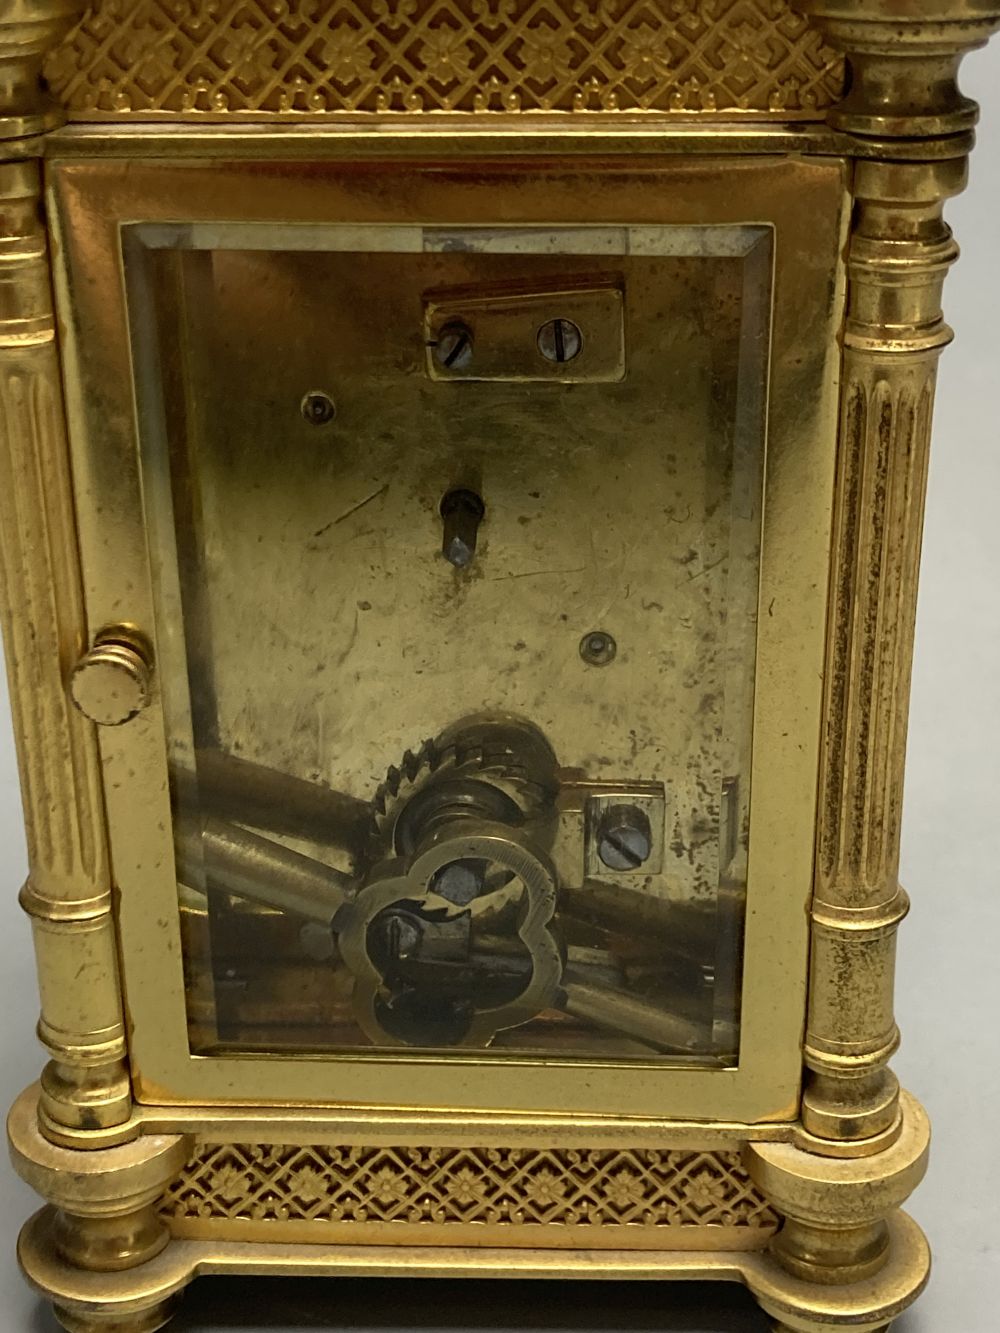 A brass timepiece with four glass panels and filigree decoration